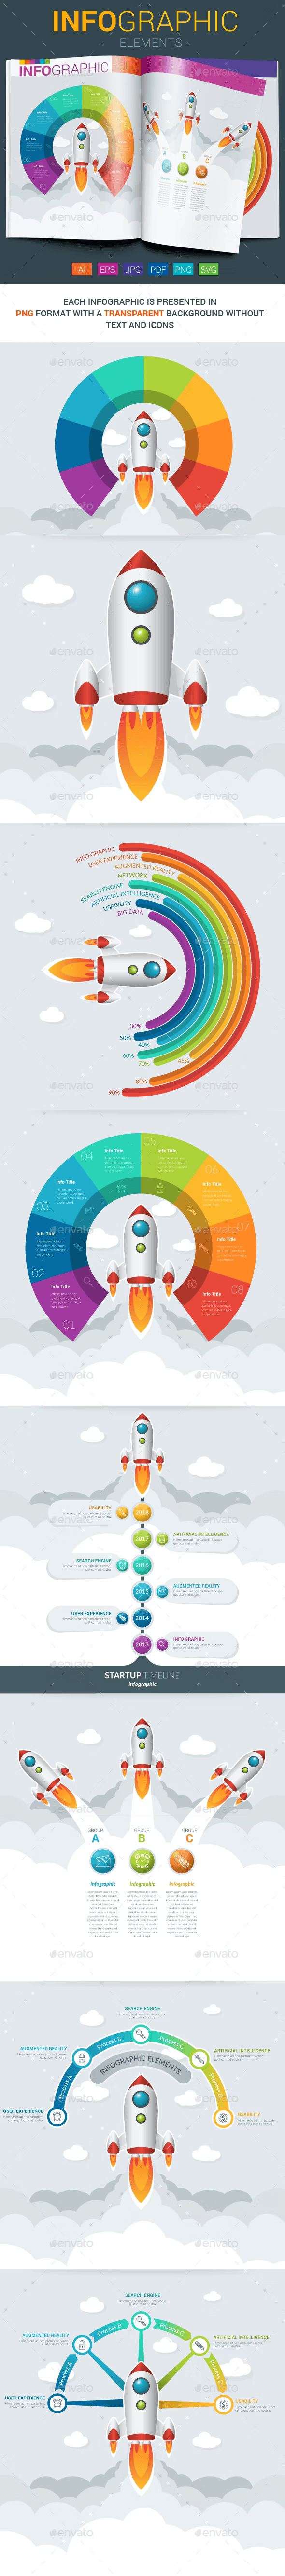 infographic startup 590 304